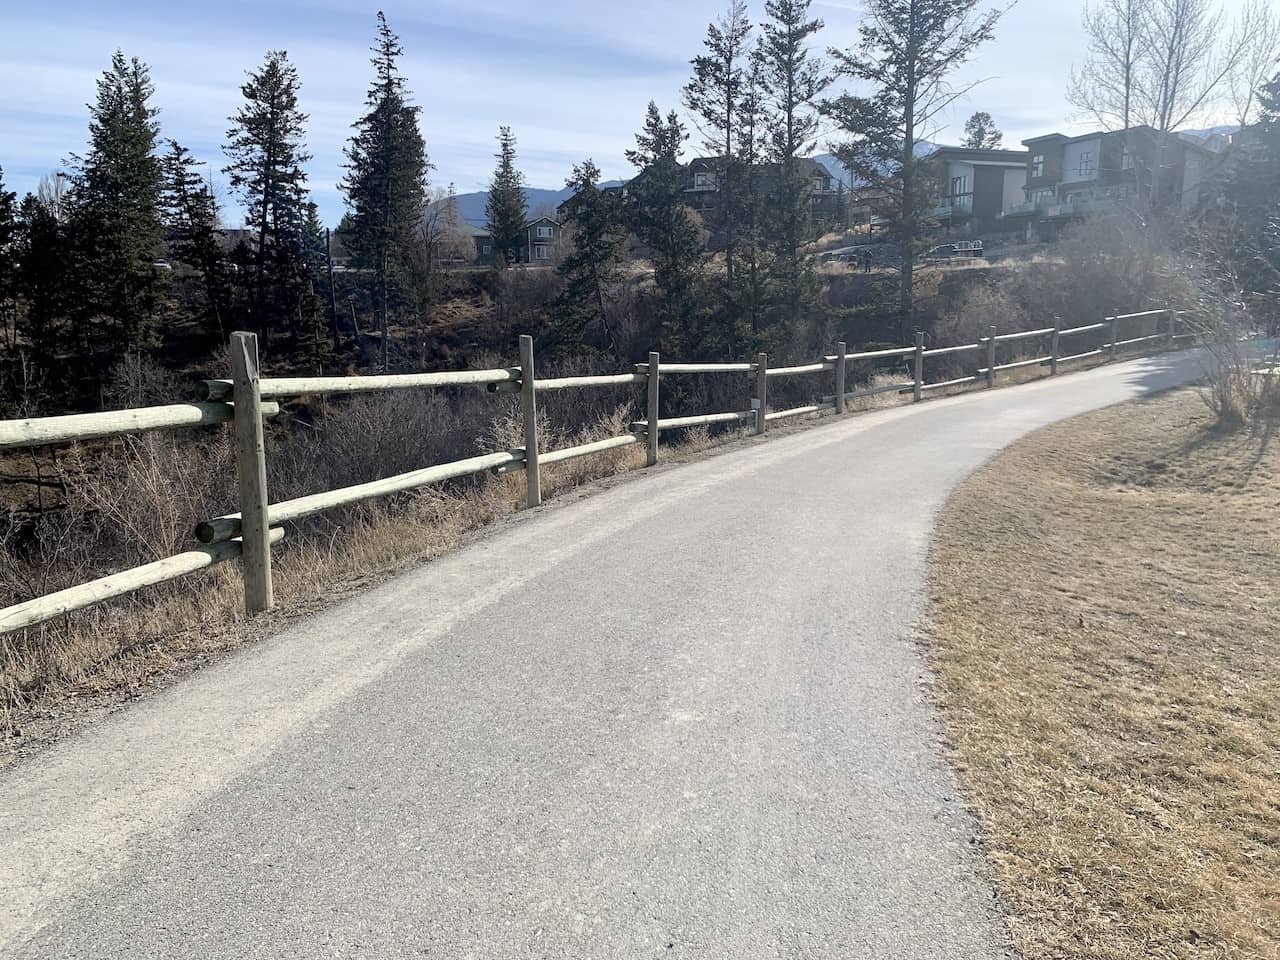 Pathway Around the Outside of Pothole Park - There is a fence-lined, paved walkway around the perimeter of Pothole Park in Invermere, British Columbia.